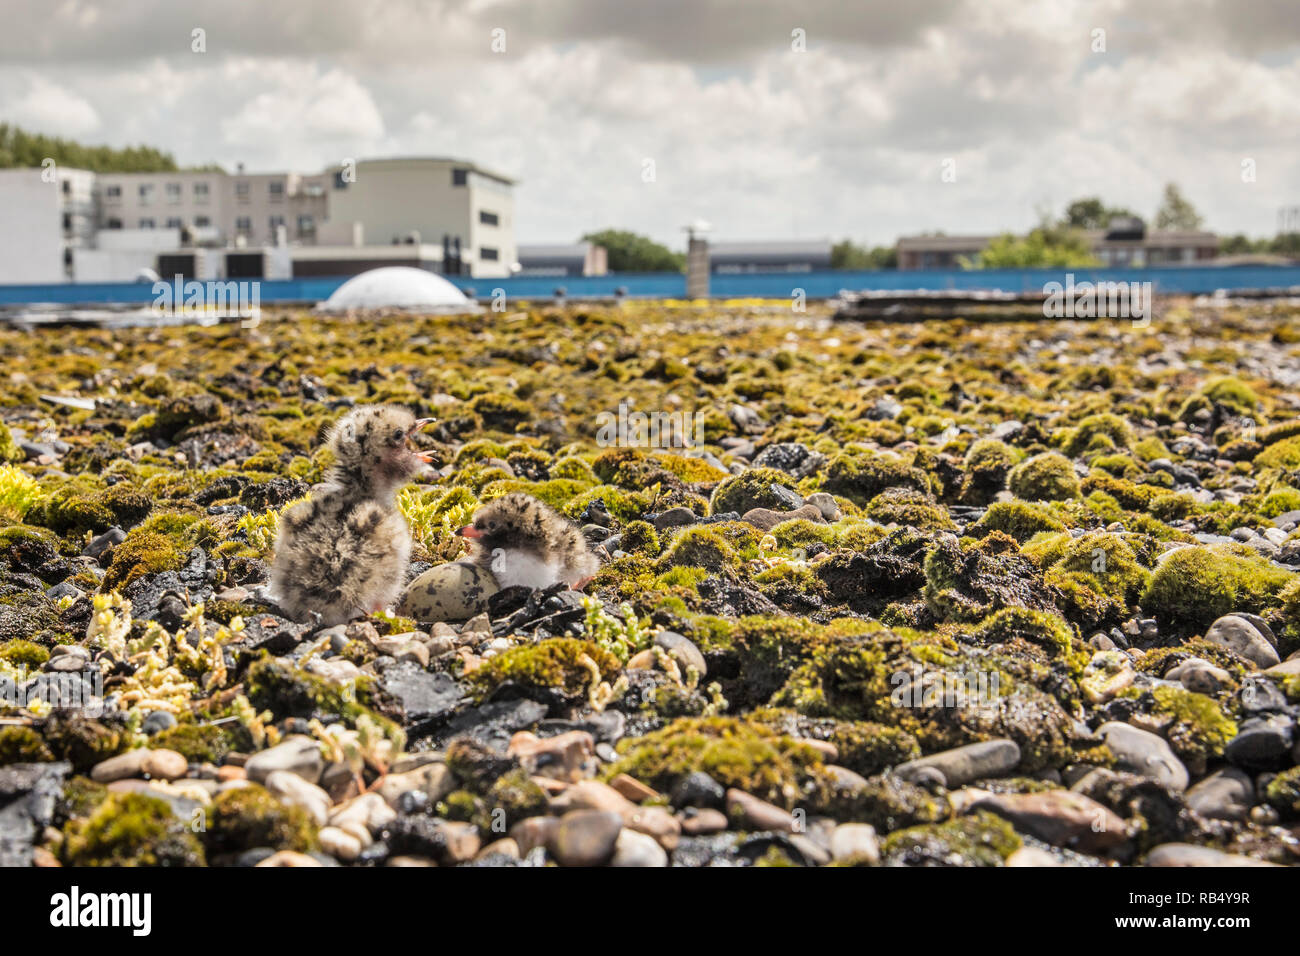 The Netherlands, Amsterdam, Young black-headed gulls on nest. Stock Photo